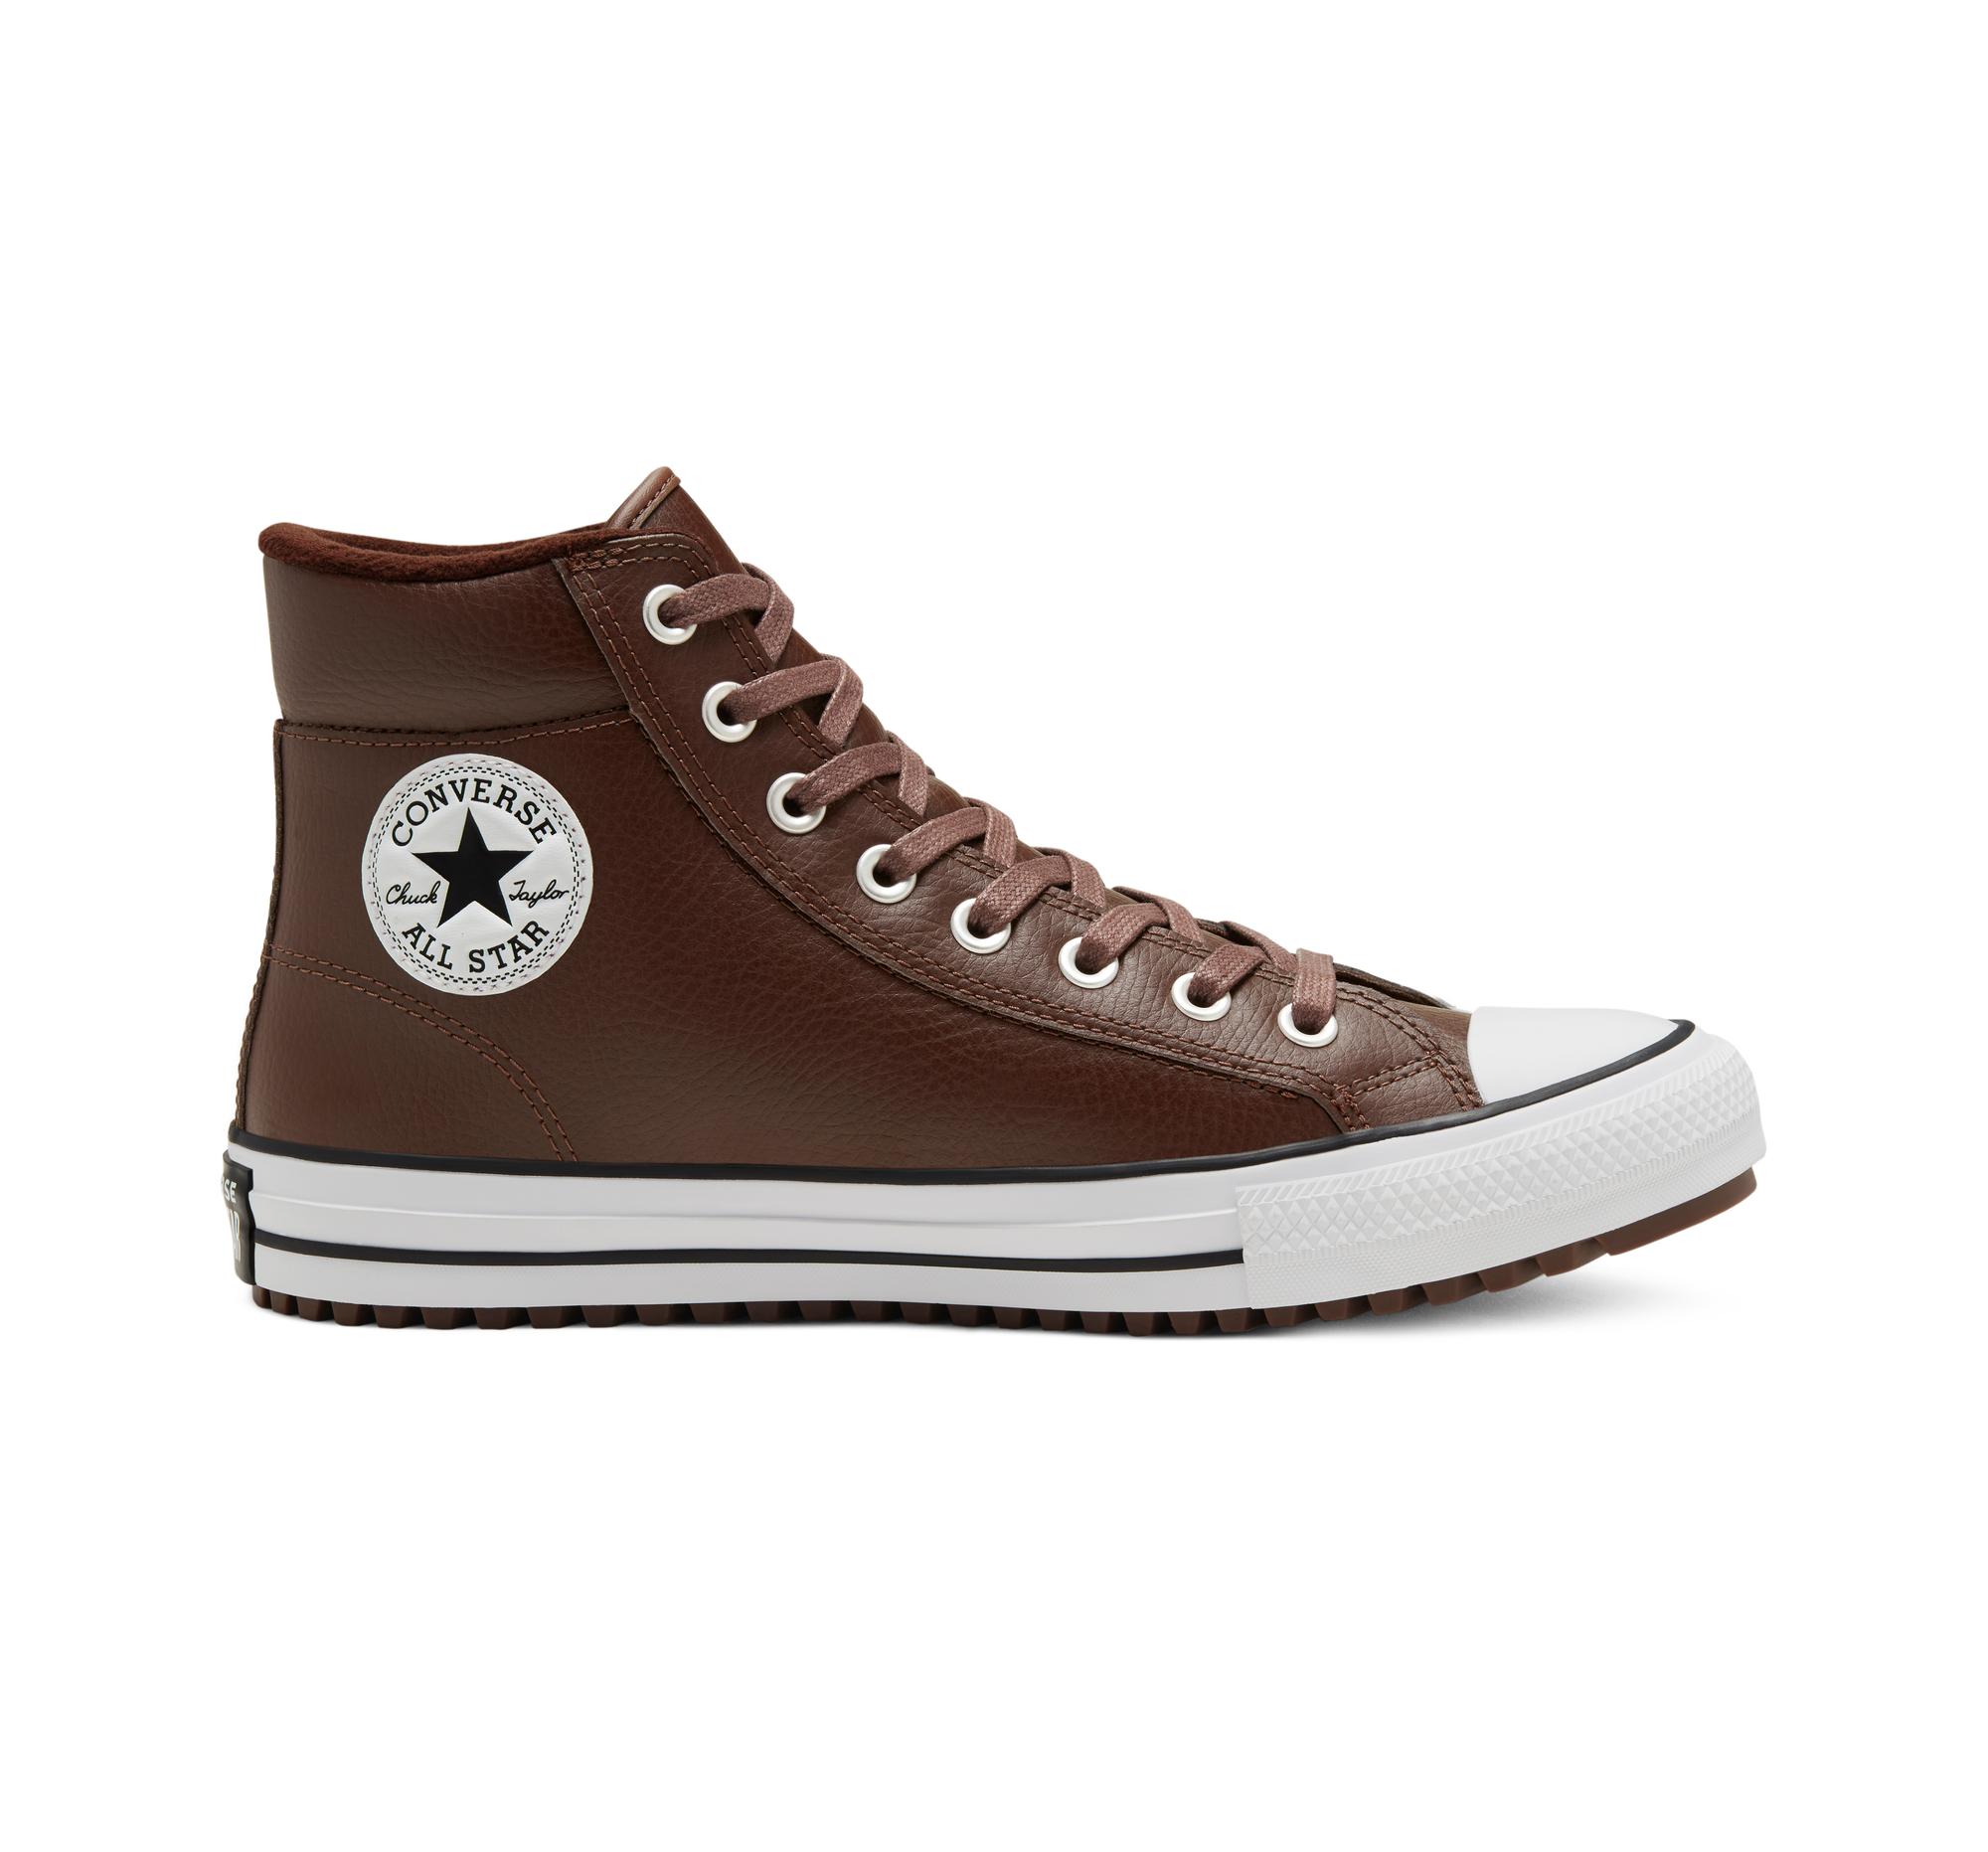 Converse Utility Chuck Taylor All Star Pc Boot in Brown | Lyst